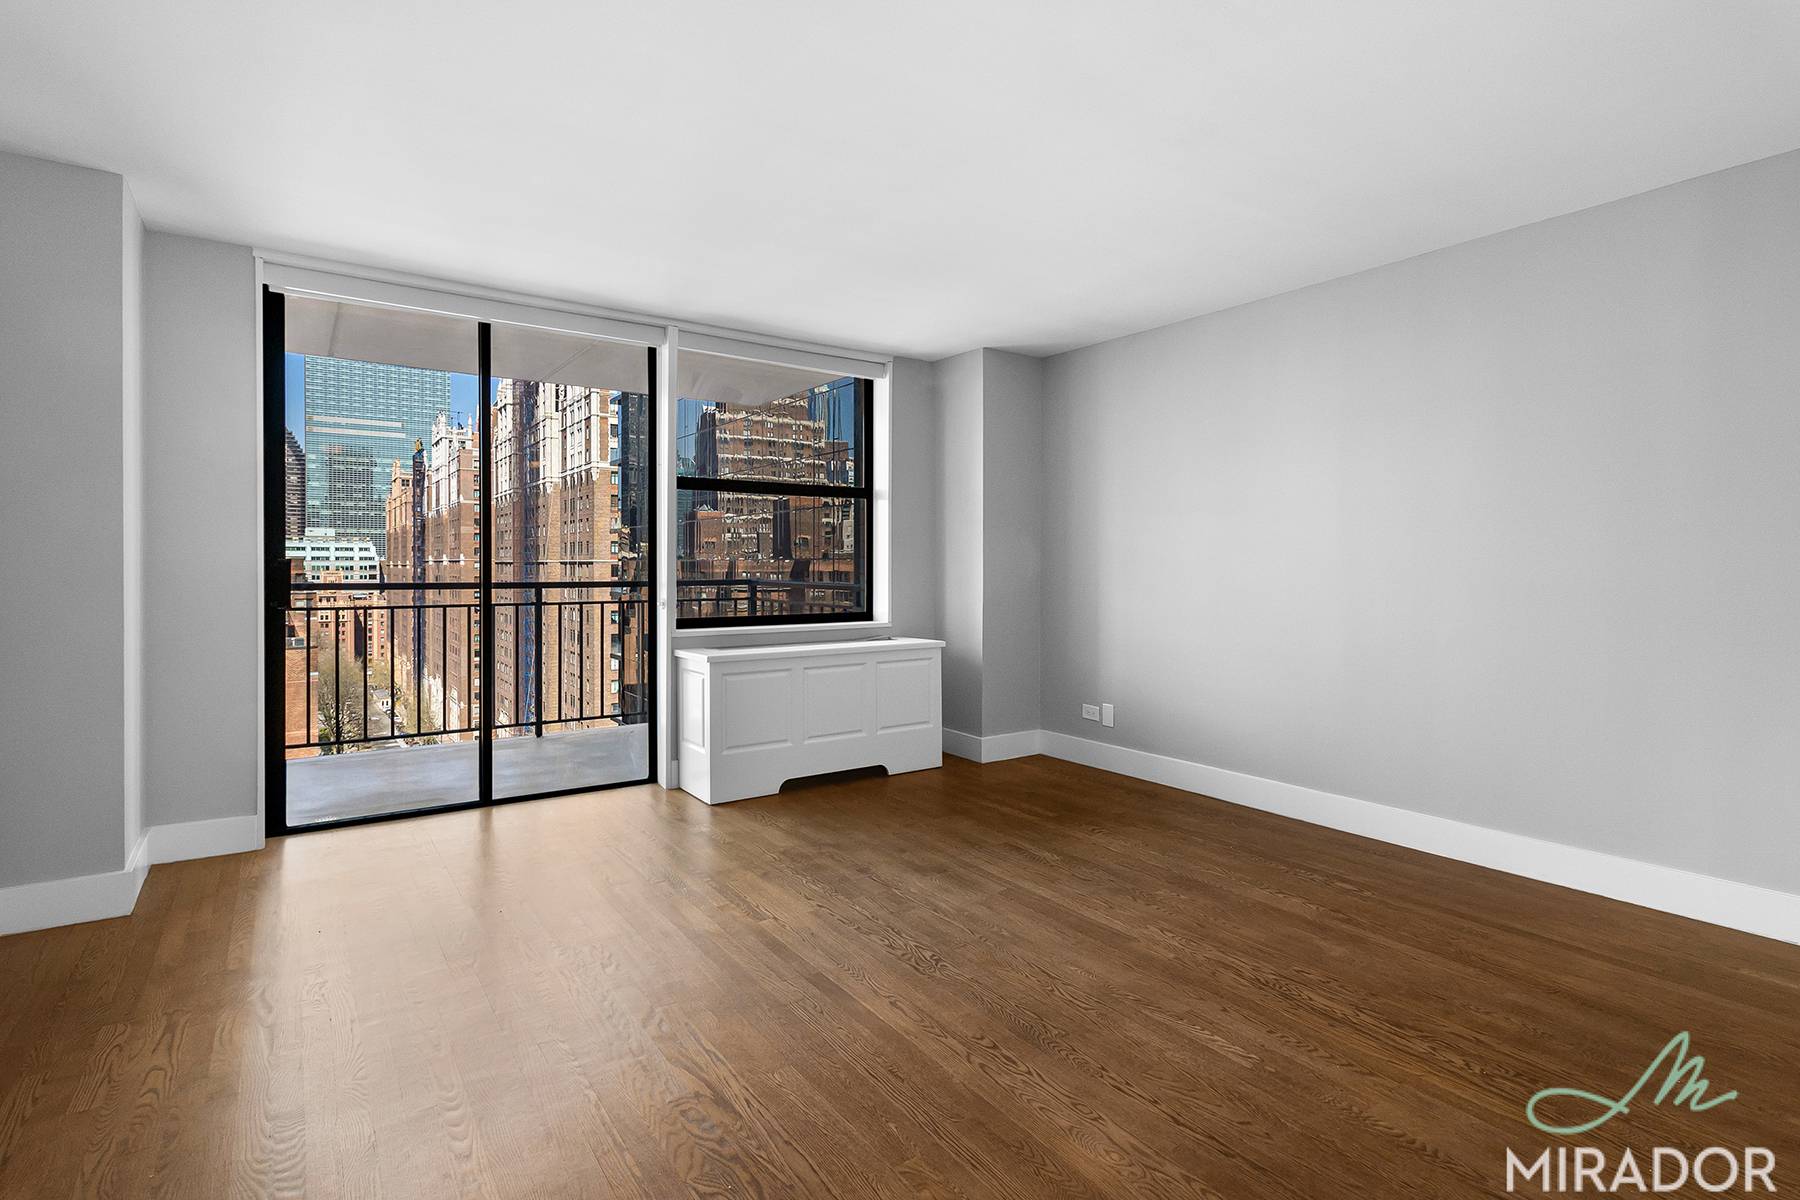 Beautiful south facing apartment with a private balcony on the 9th floor of New York Tower.